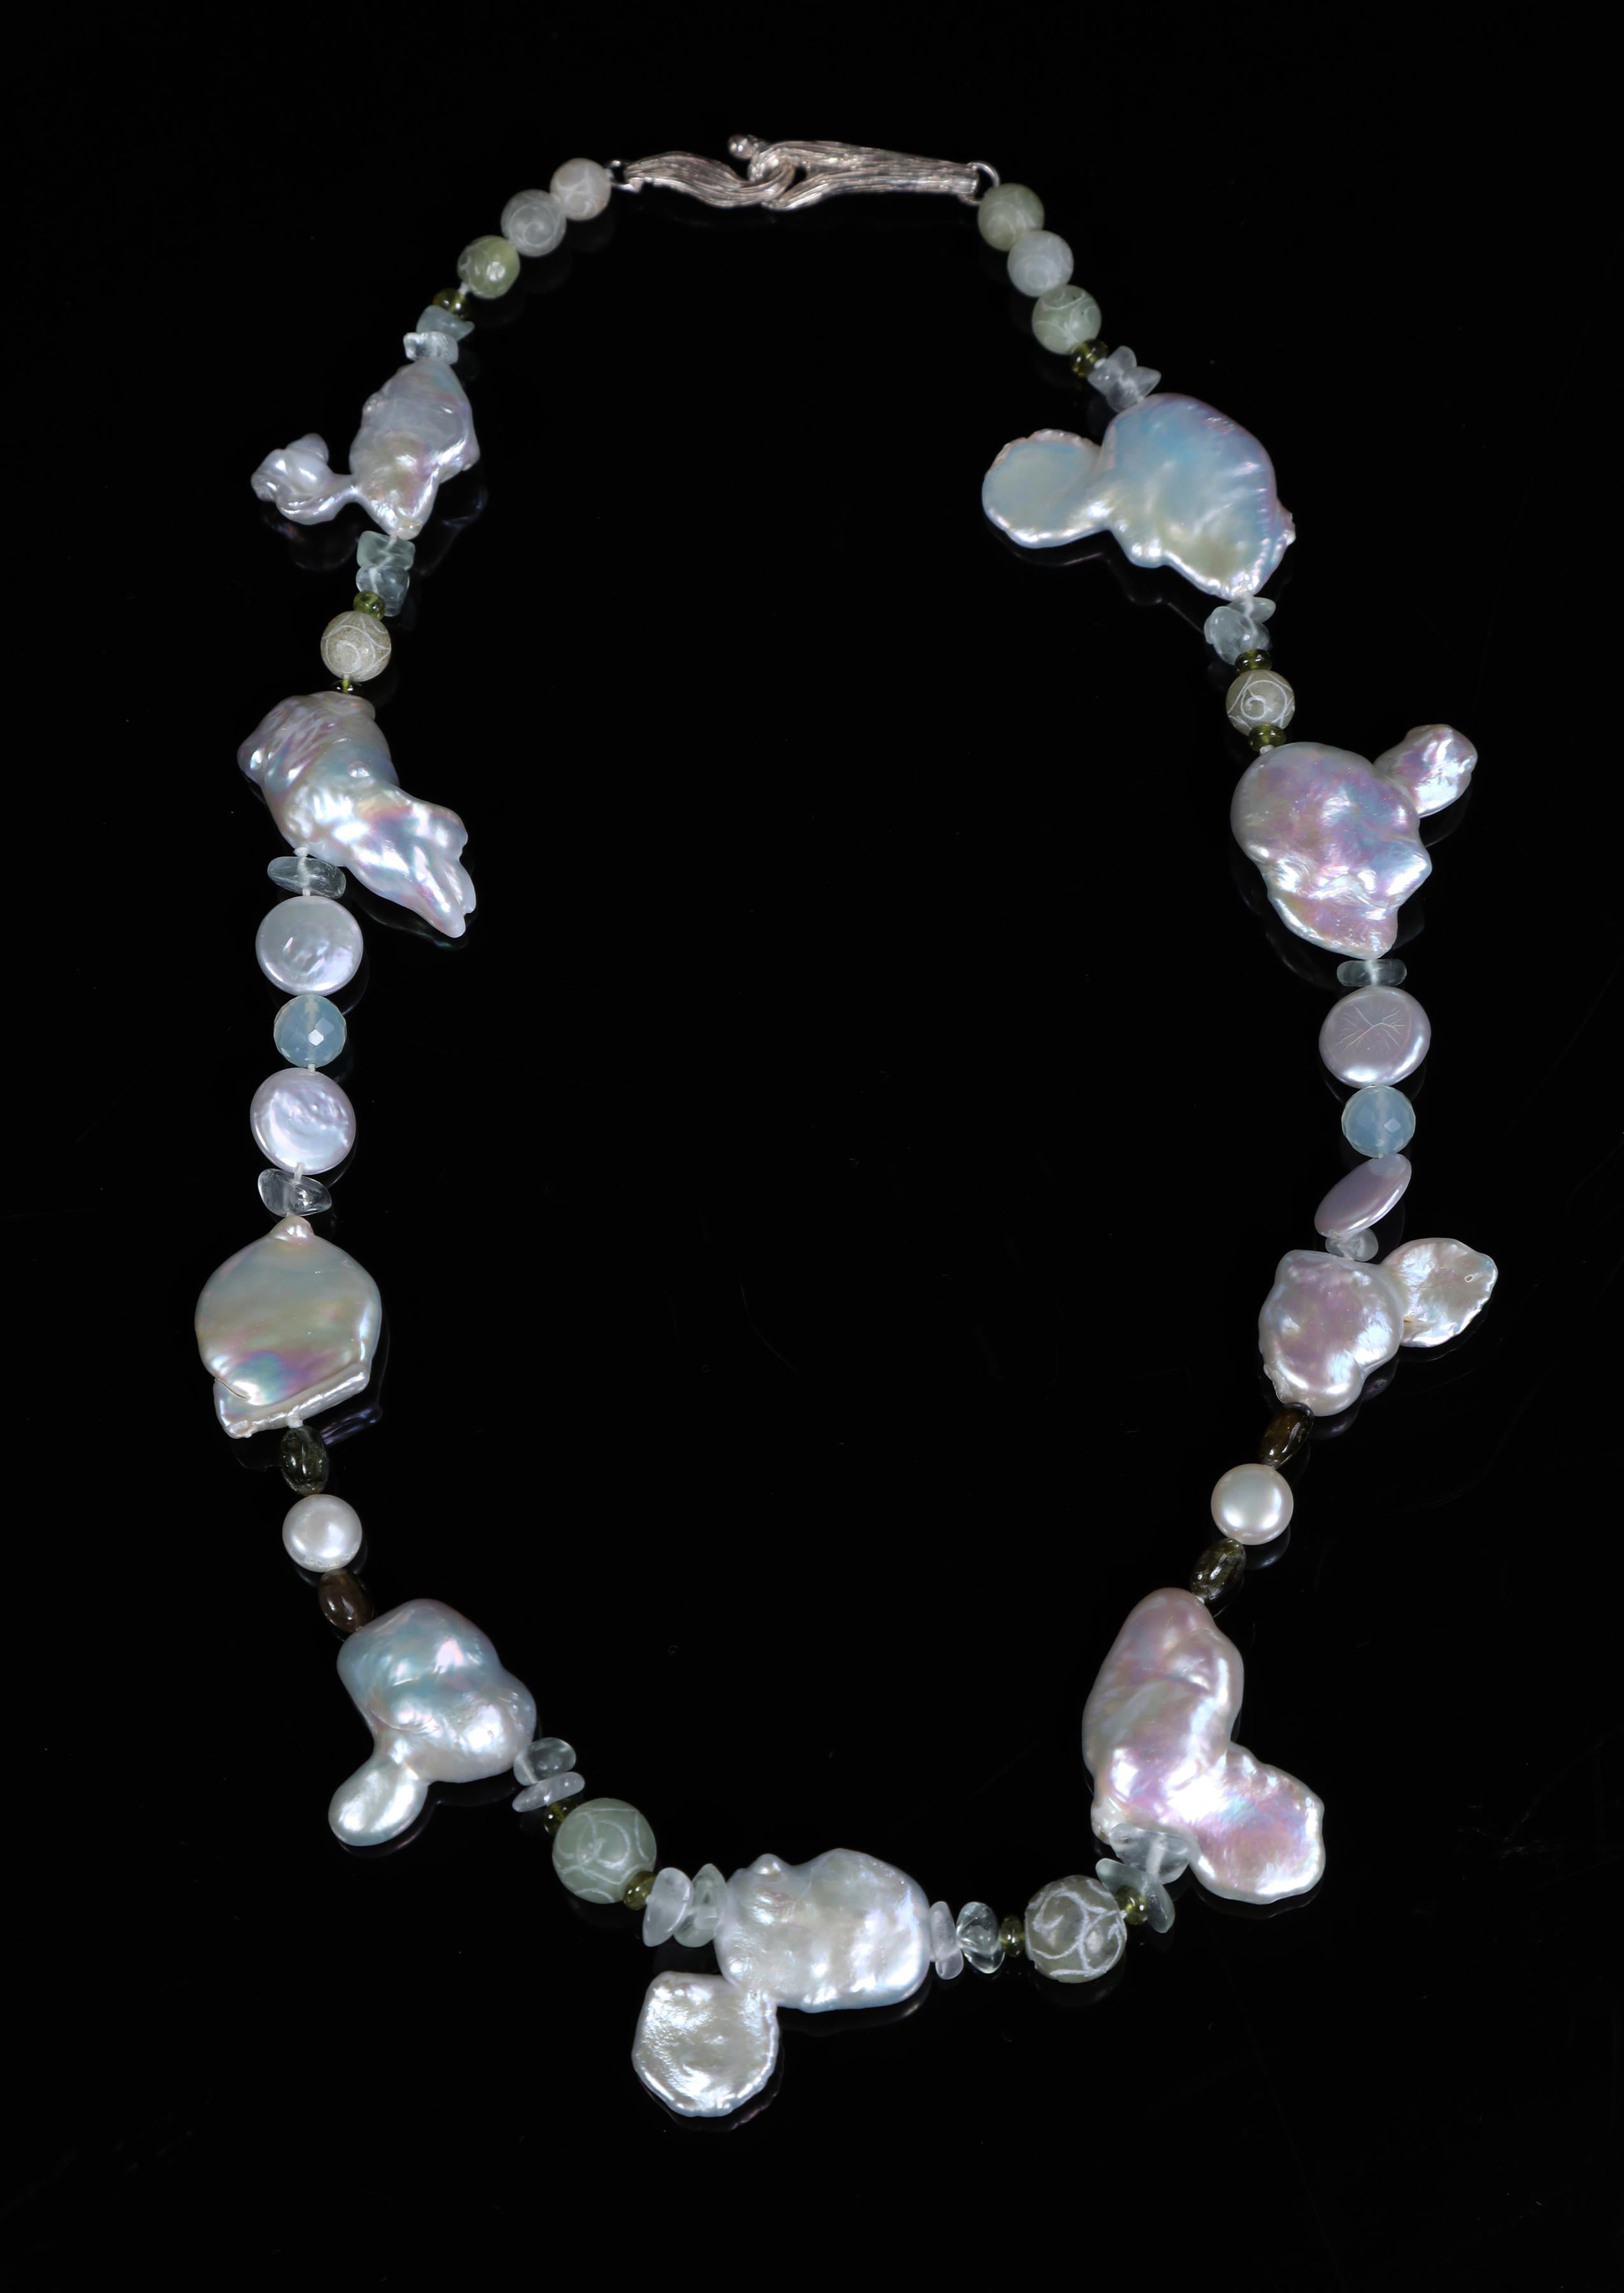 A princess necklace of Keshi pearls, matt finished carved jade, green tourmaline, and fluorite.  Our vanilla bean clasp in sterling silver brings On the Beach together. 18”